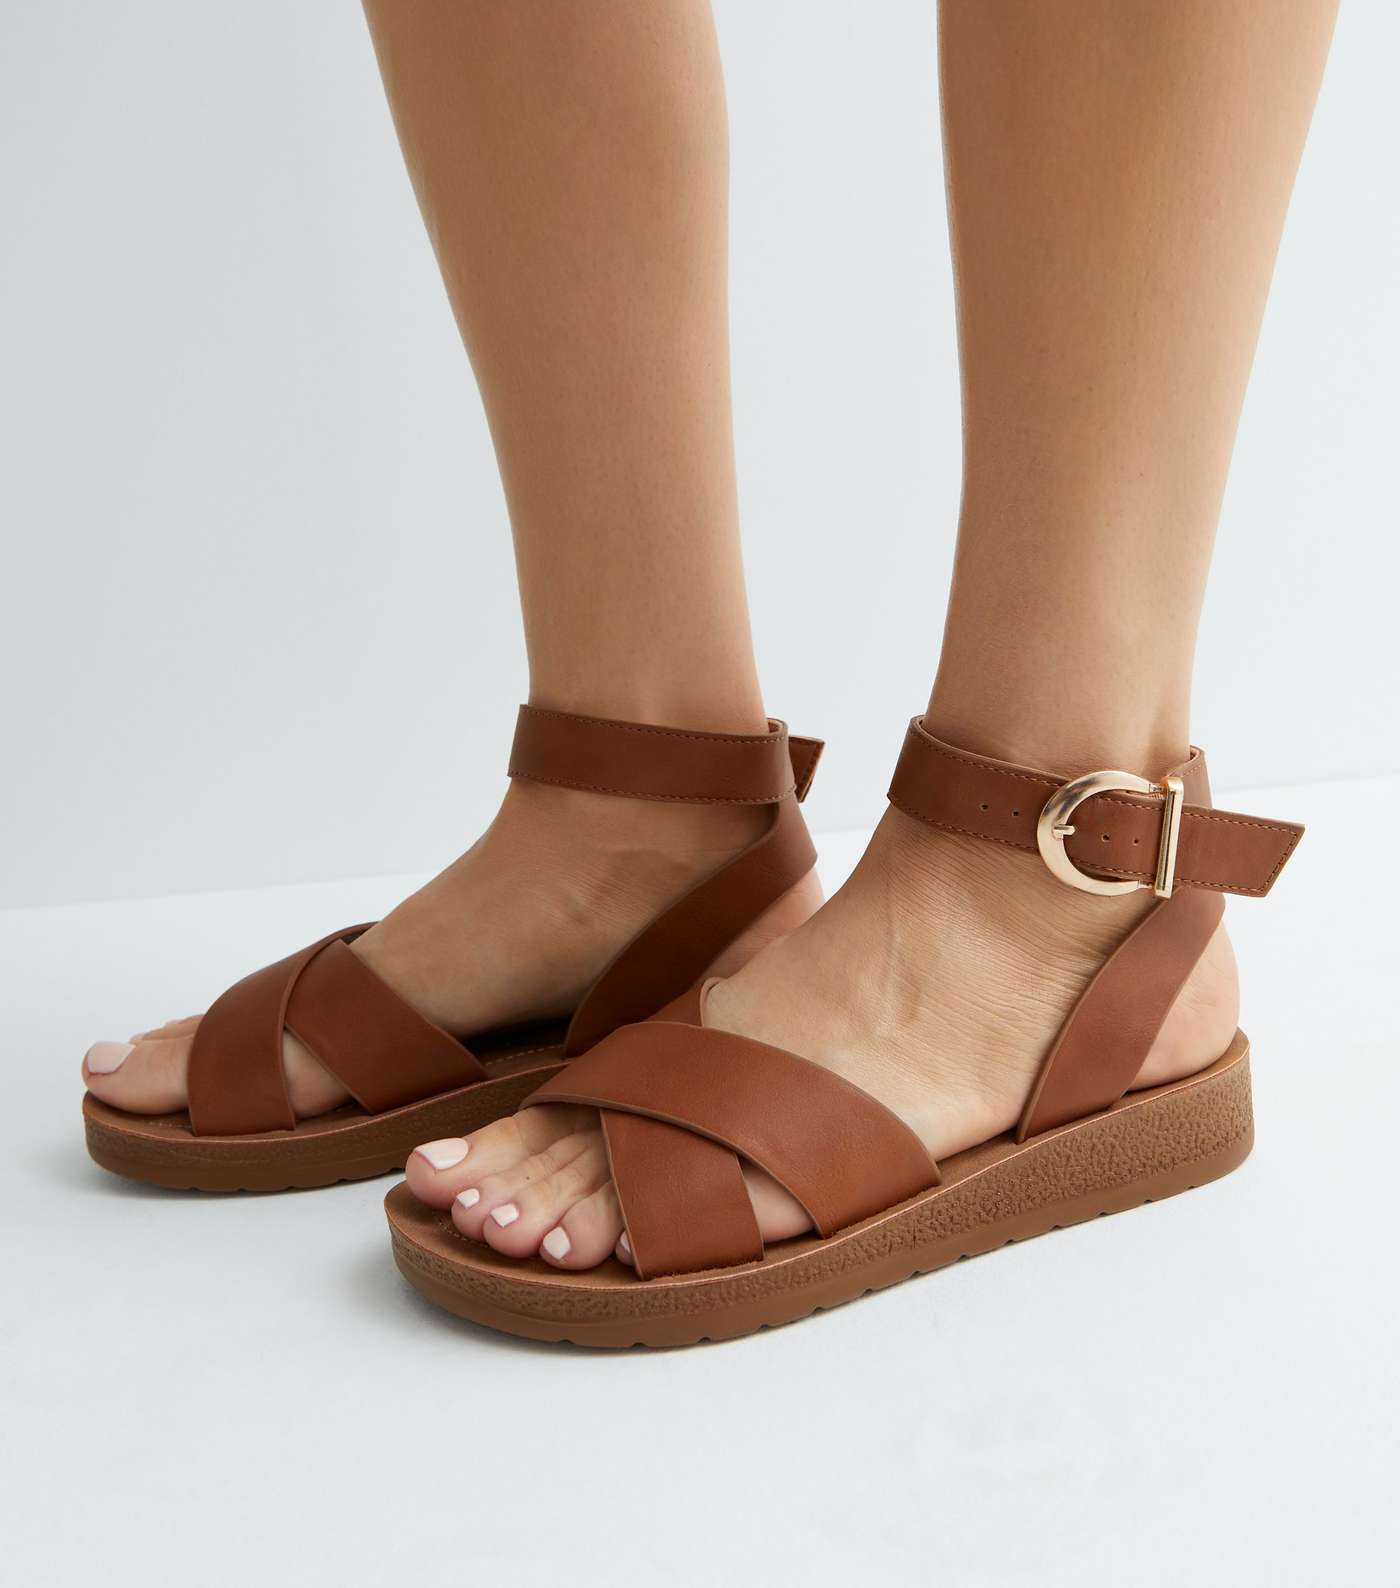 Wide Fit Tan Leather-Look Cross Strap Footbed Sandals Image 2